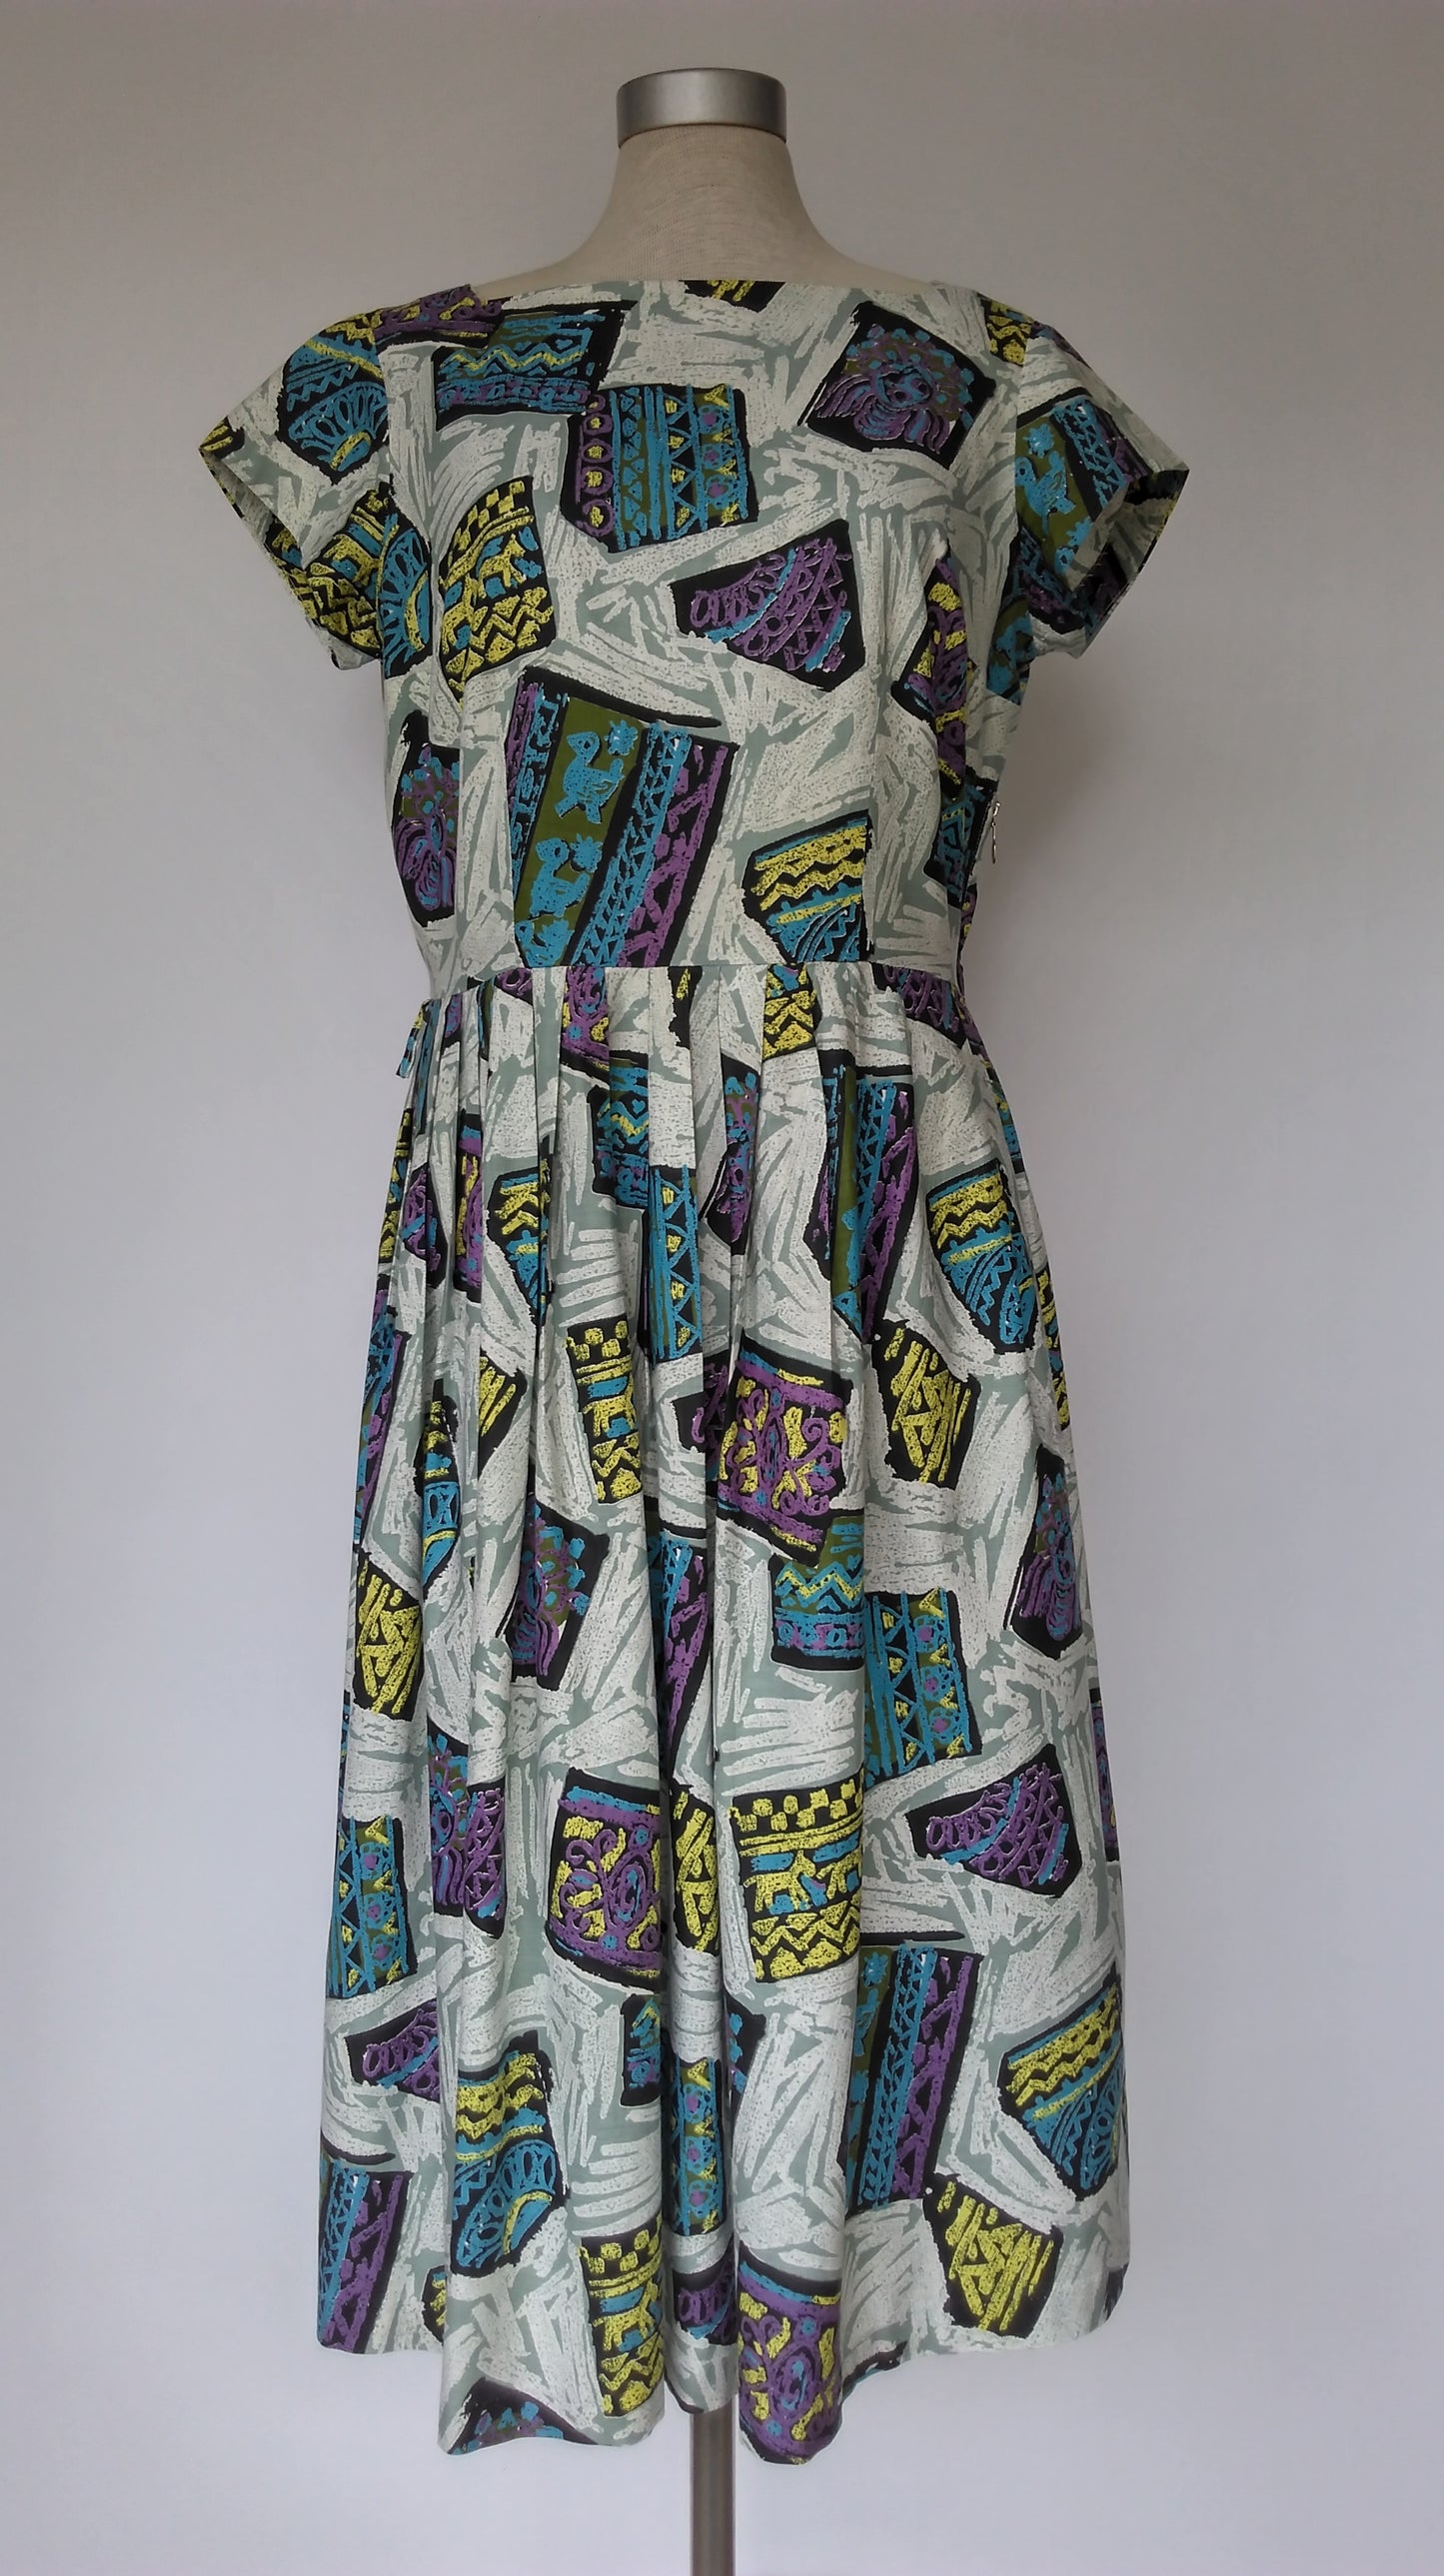 Quirky Print Dress 1950s